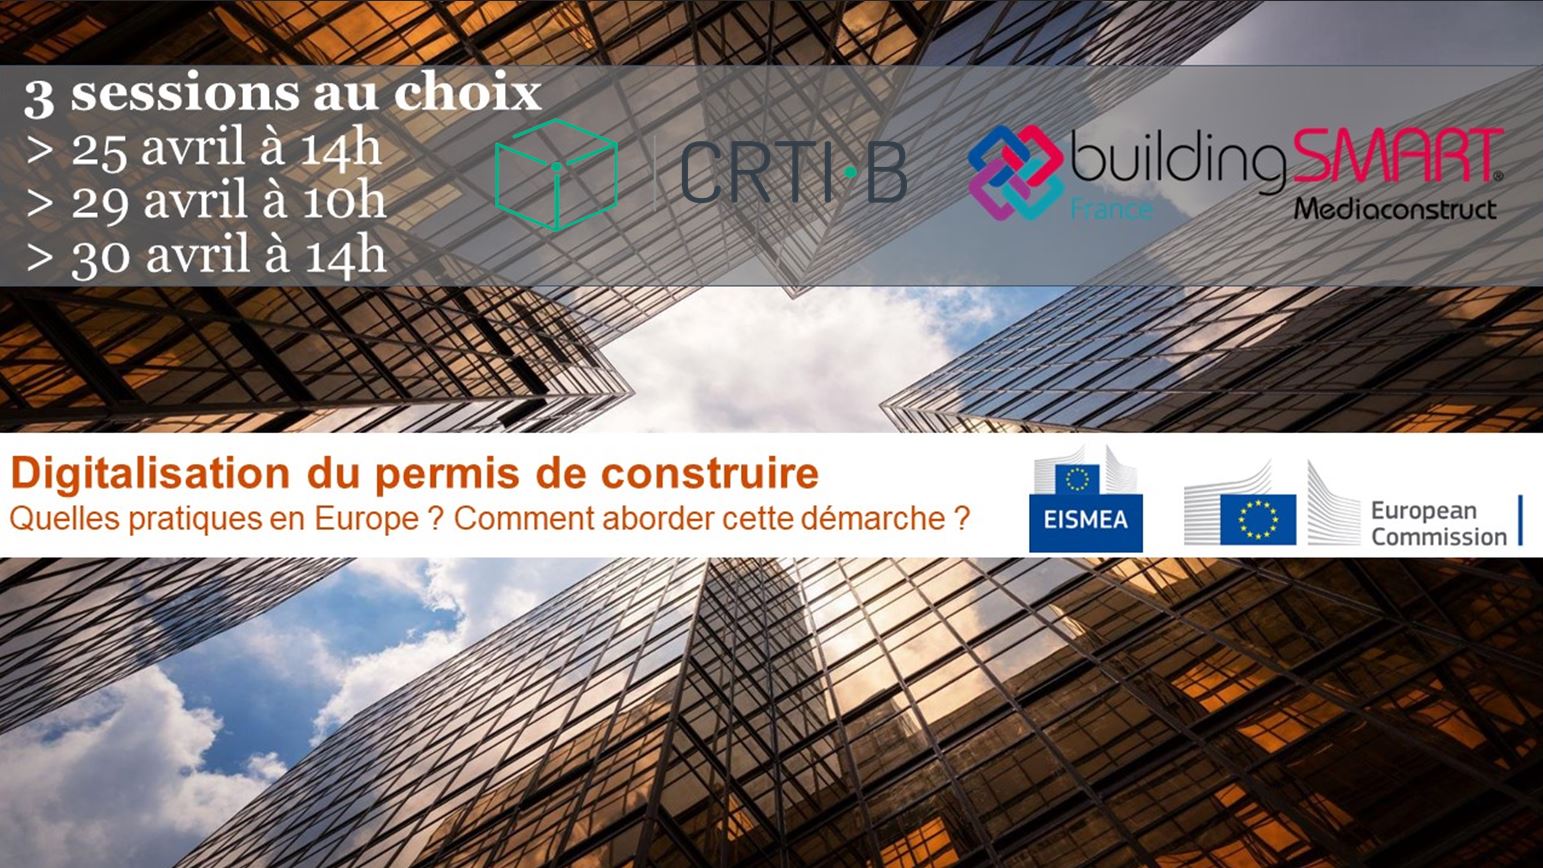 “DIGITAL BUILDING PERMITS: PRINCIPLES, EXAMPLES AND BEST PRACTICE IN EUROPE” French sessions